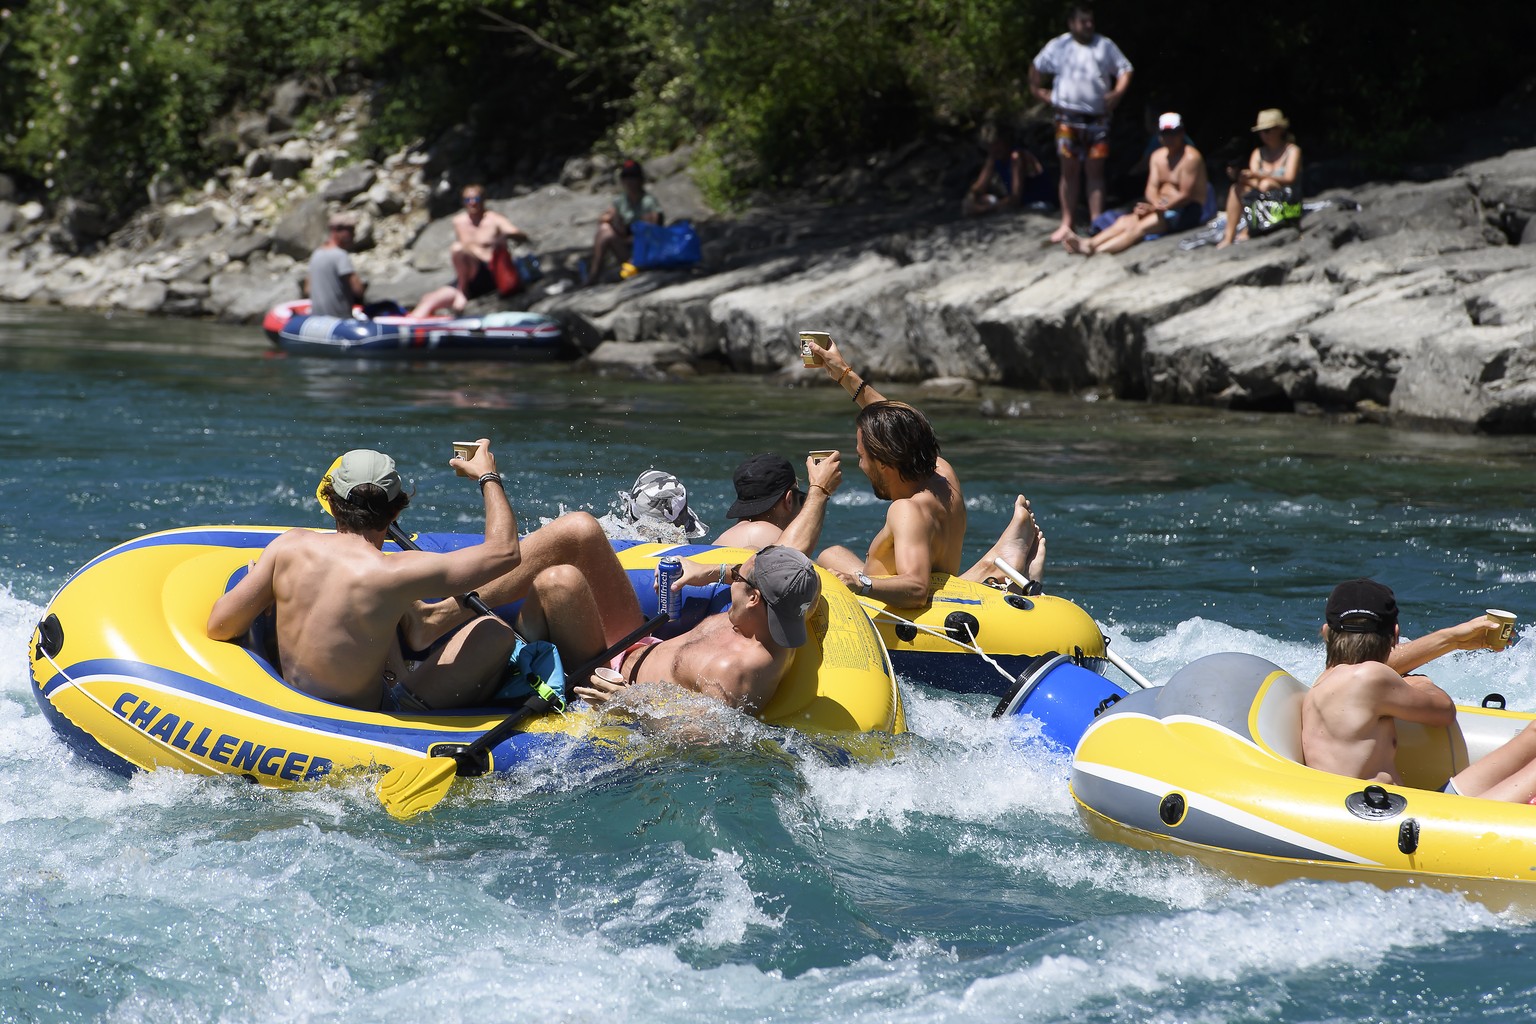 People on inflatable boats enjoy the sun on the Aare River at Uttigen, between Thun and Bern, Switzerland, during the sunny and warm weather, Monday, June 1, 2020. (KEYSTONE/Anthony Anex)